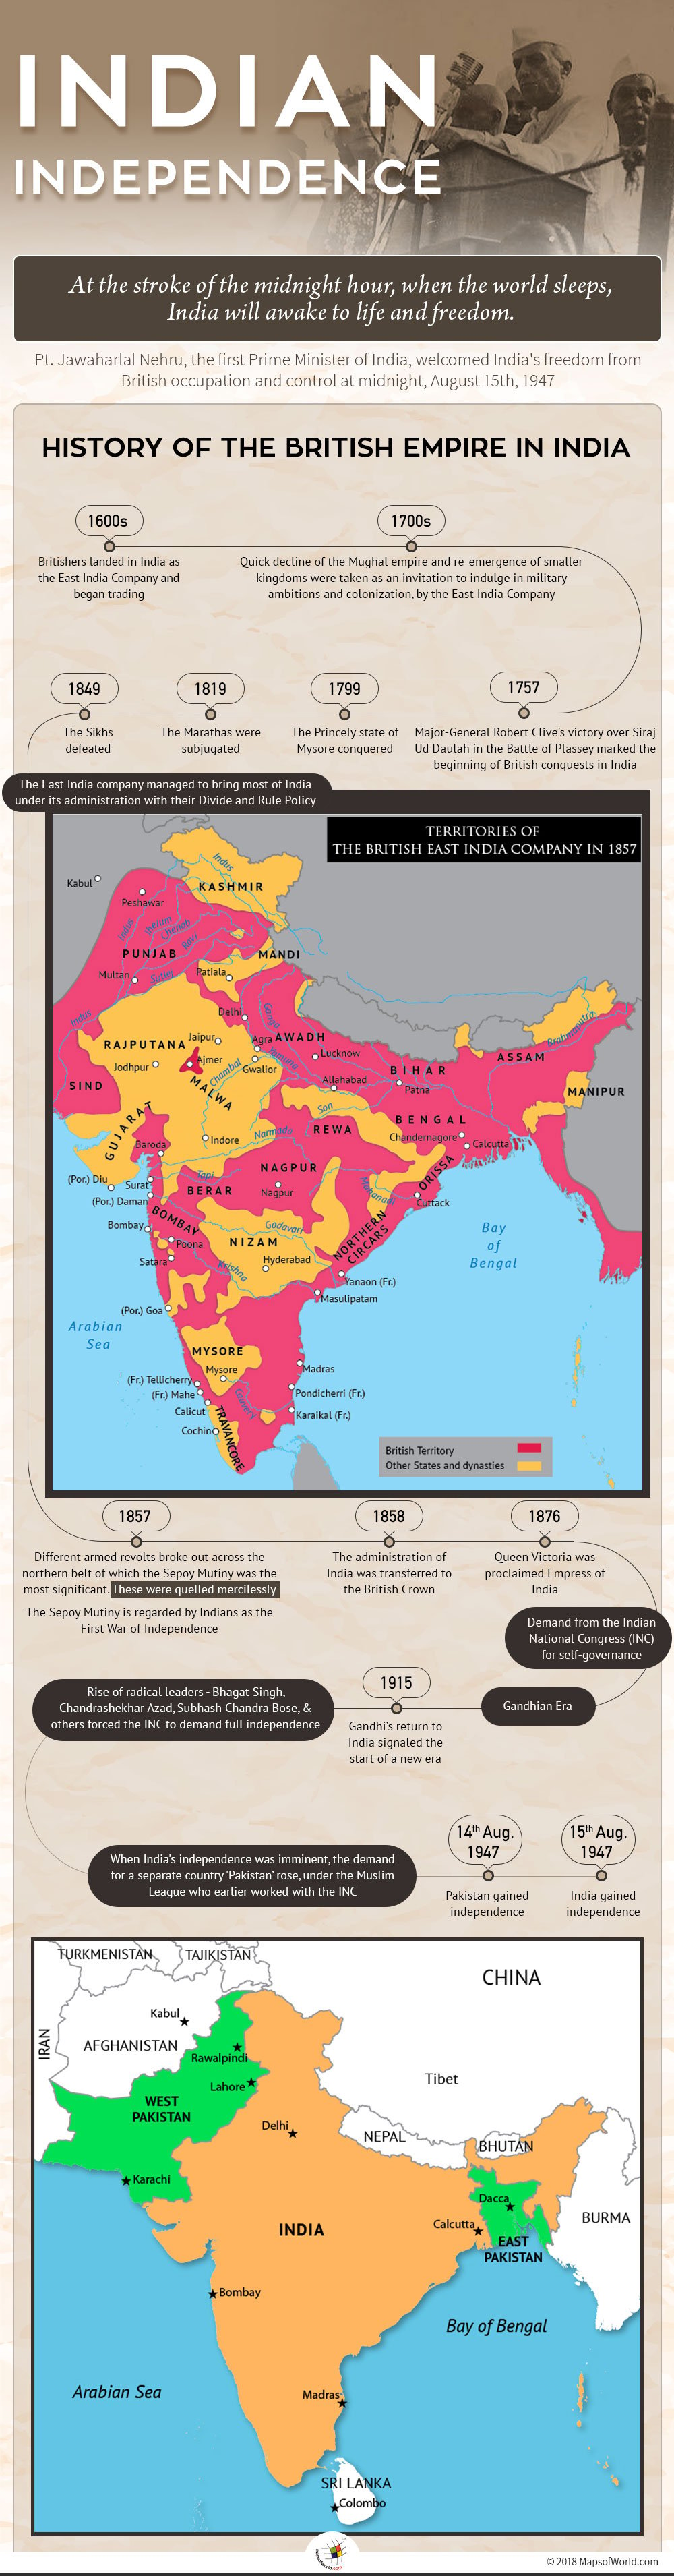 Infographic depicting the journey of Indian Independence